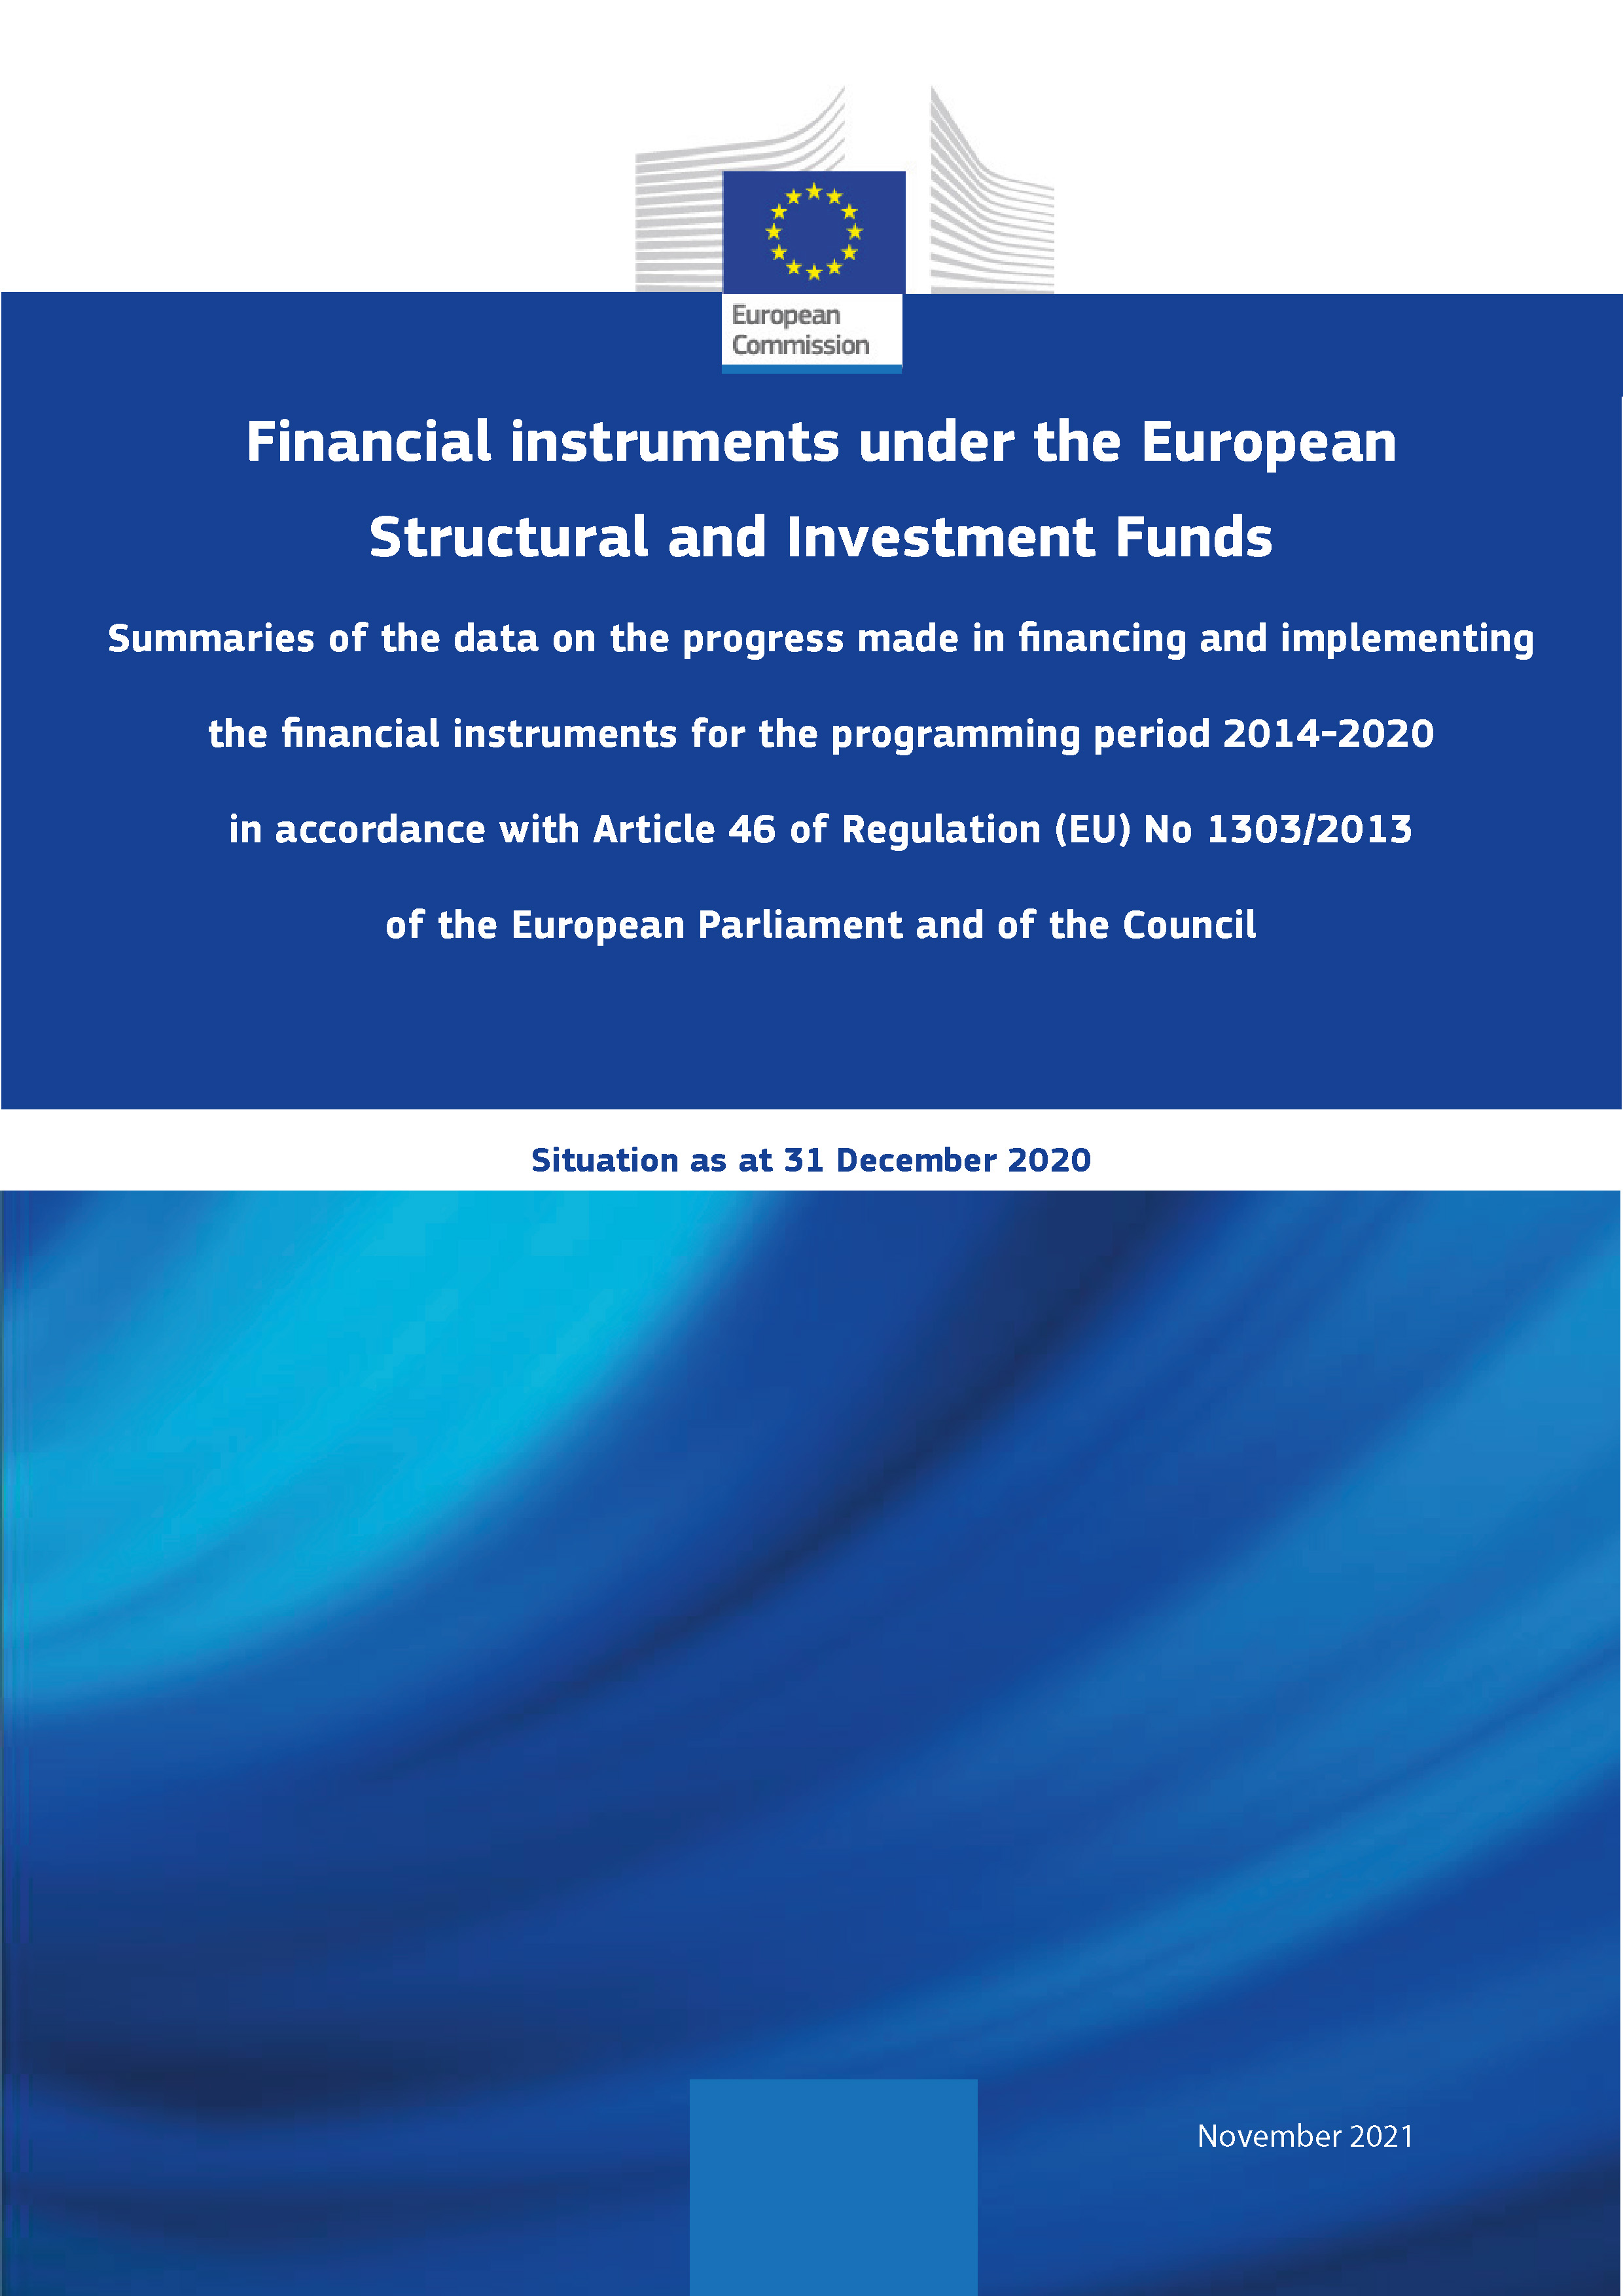 annual report summarising the progress made in financing and implementing financial instruments (FIs) supported by European Structural and Investment Funds (ESIF) for the period until end December 2020